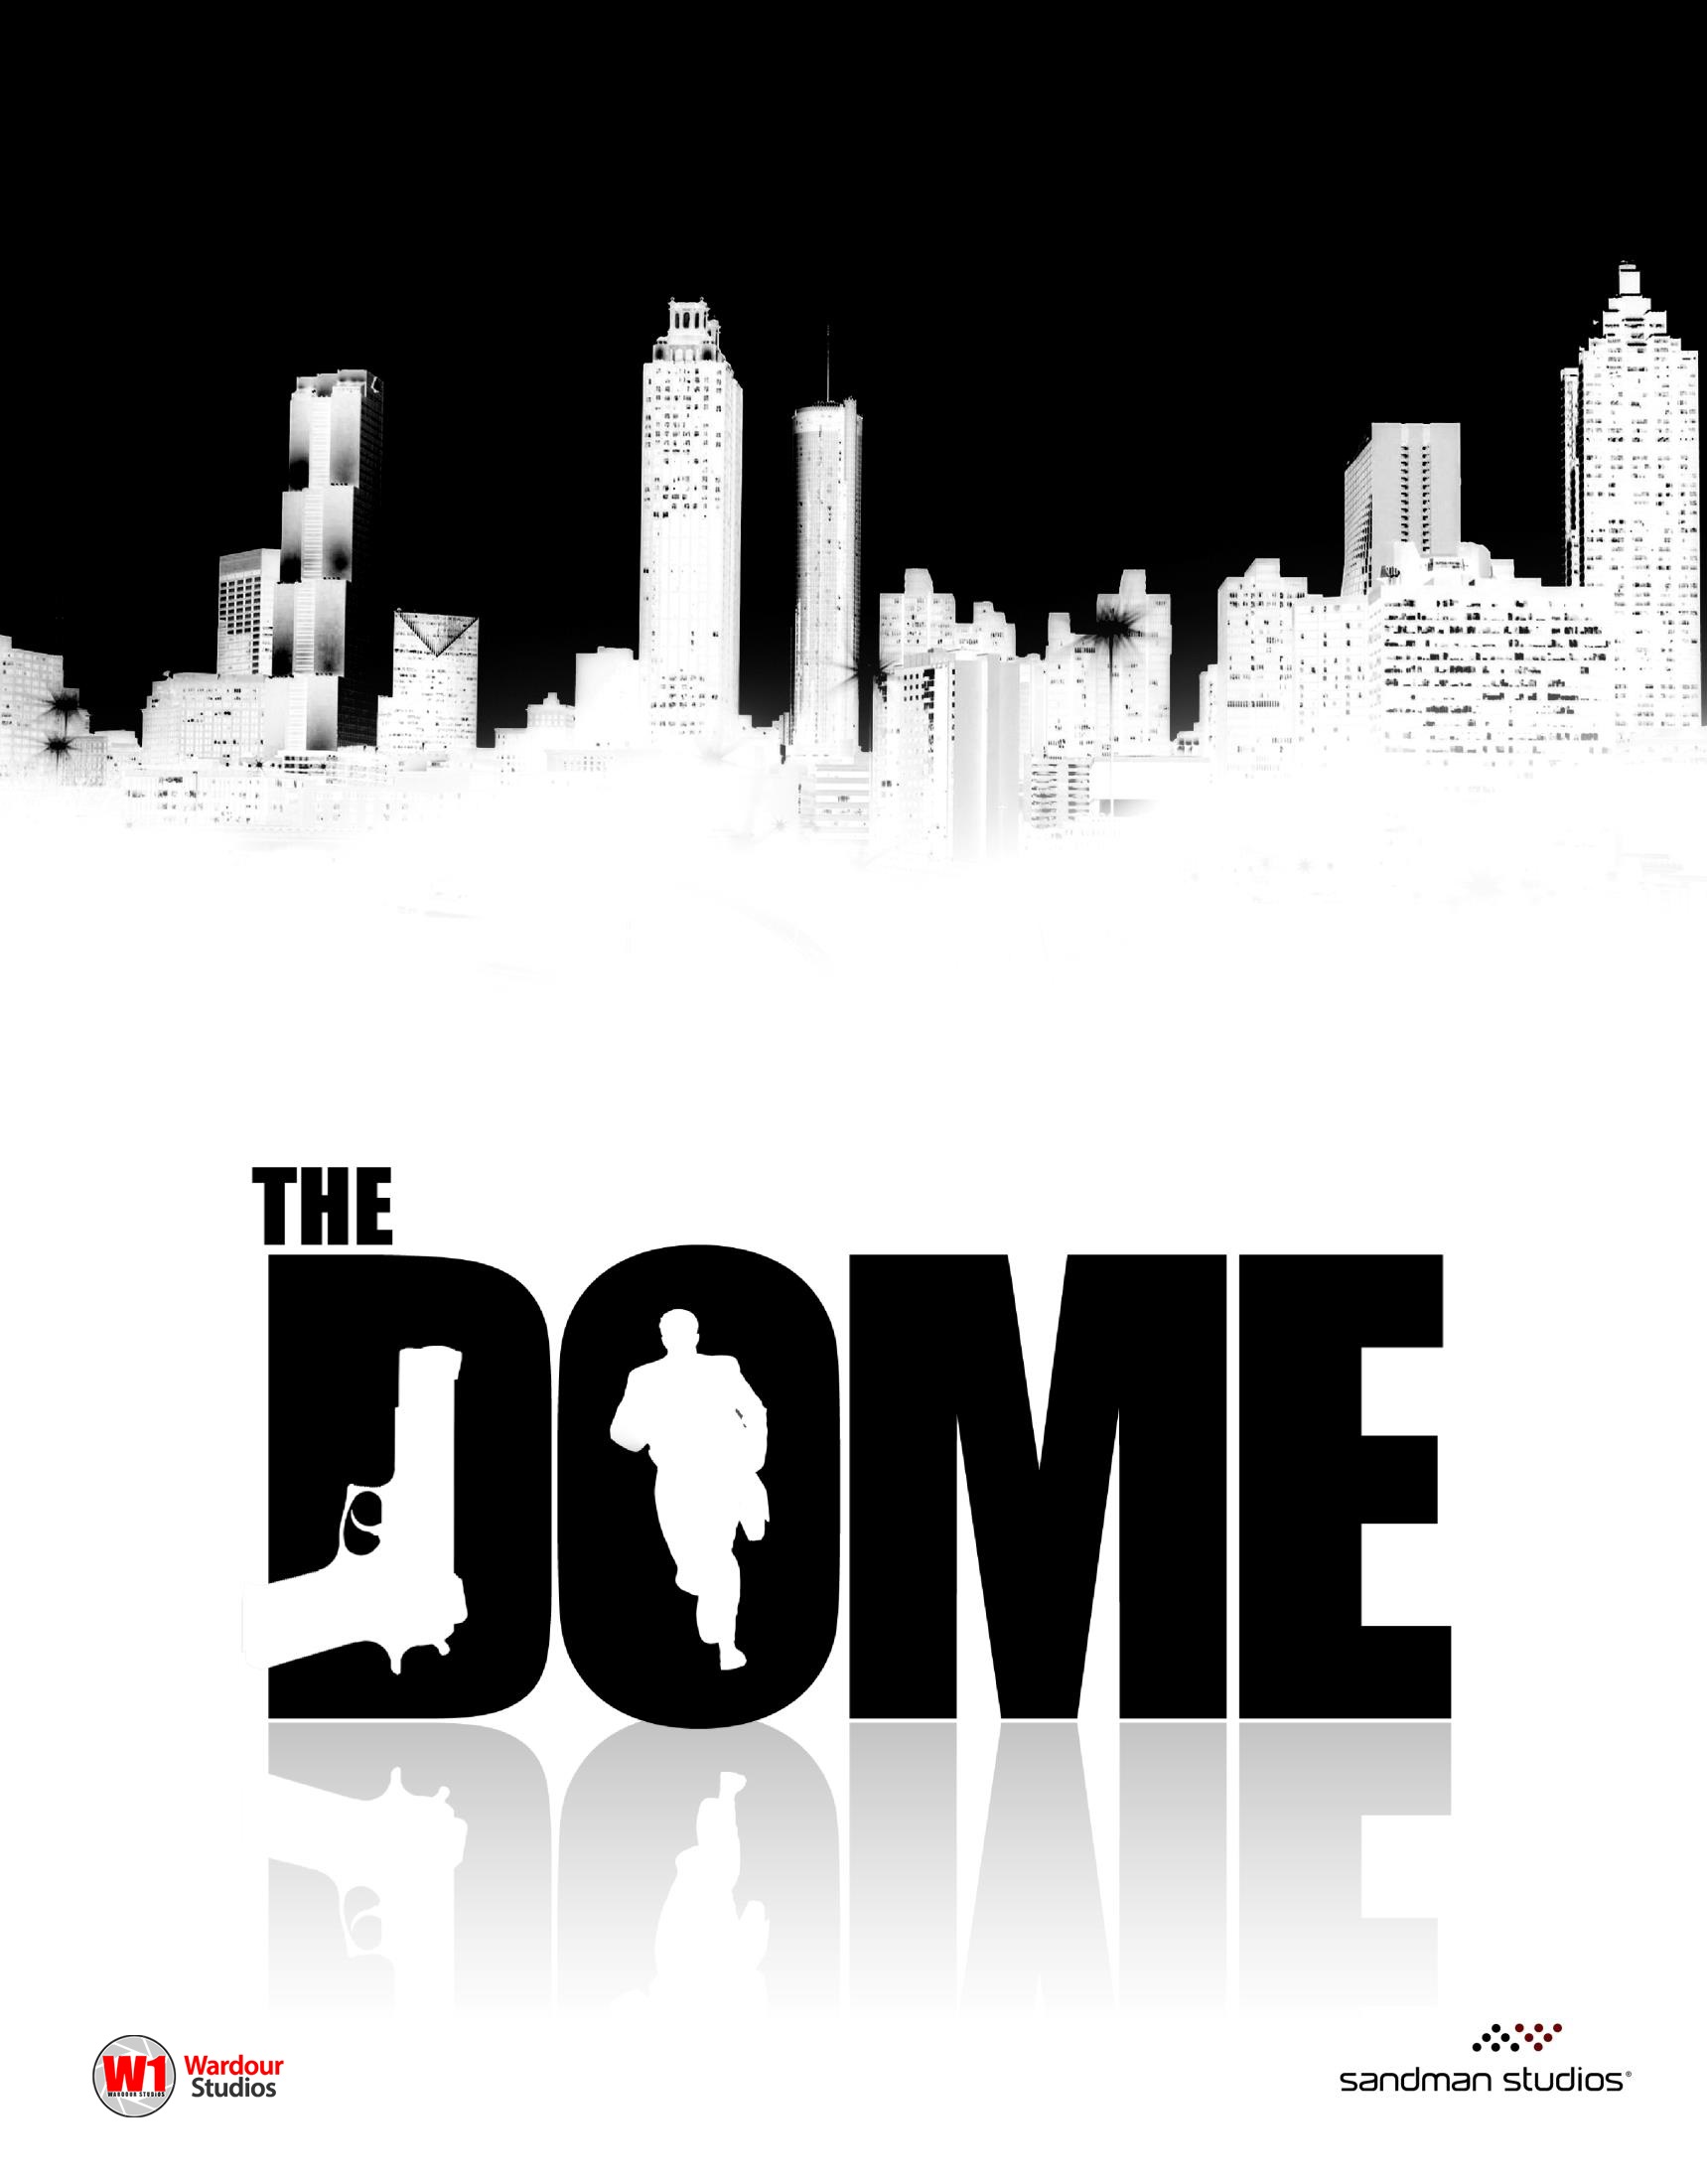 Lee Baker will direct The Dome, a sci-fi feature film. Wardour Studios was working with Lee Baker to take this film on the road at the very beginning.